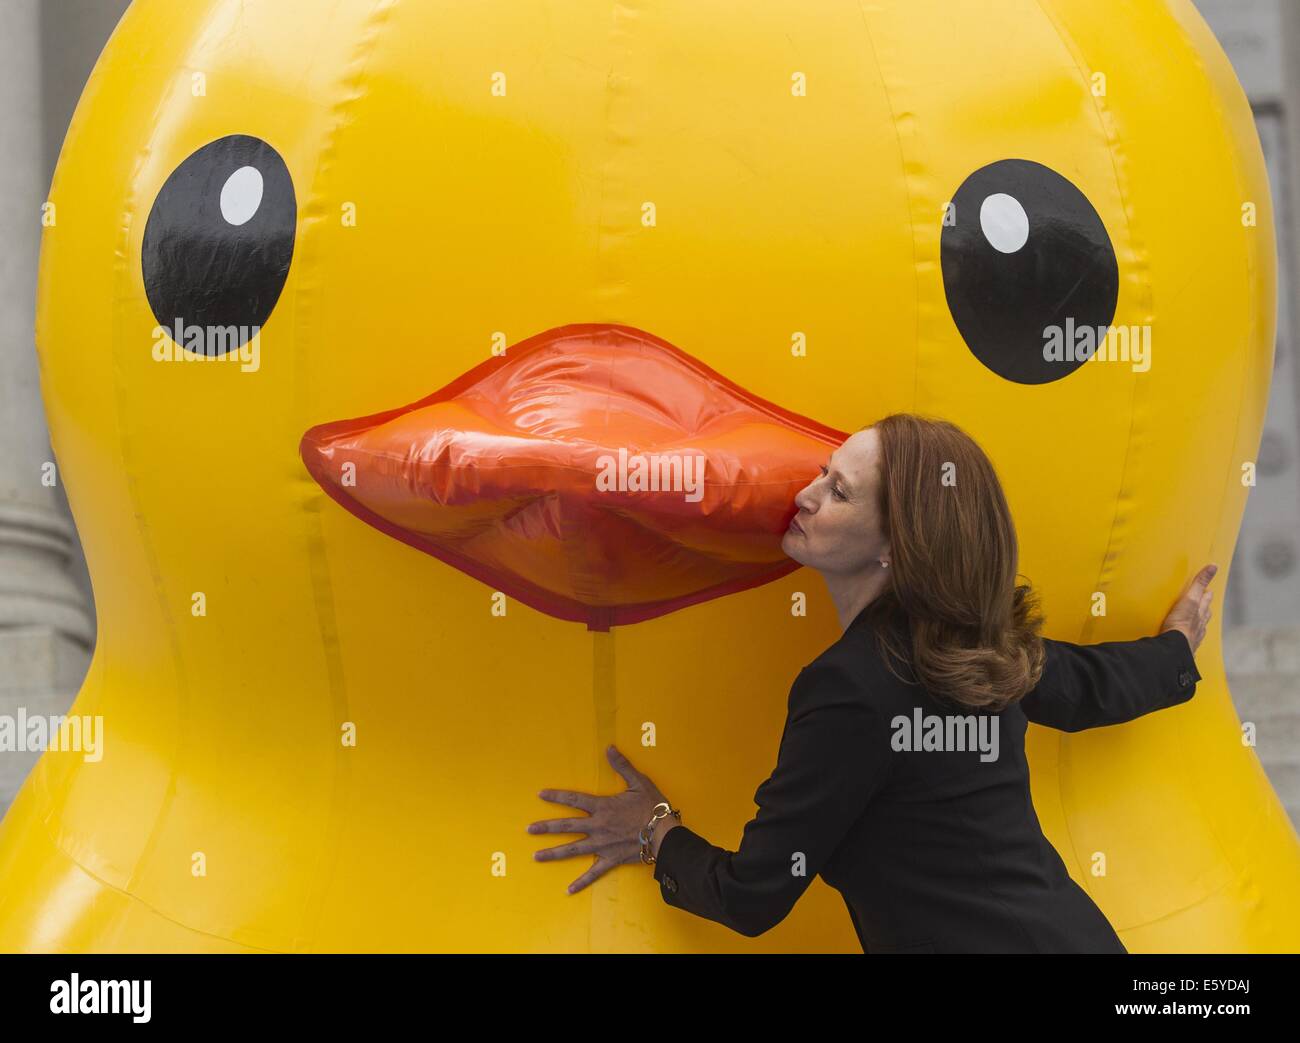 Los Angeles, California, USA. 8th Aug, 2014. Amy Wakeland, wife of Los Angeles Mayor Eric Garcettia, poses with a 10-foot-tall rubber ducky ''baby duck'' squatting on the Spring Street steps of Los Angeles City Hall on Friday, Aug. 8, 2014, in Los Angeles. The bright yellow, inflatable ducky is wandering the city in search of its mother, a 60 feet high and dubbed by event organizers as the world's largest rubber ducky as part of a promotional stunt for the Tall Ships Festival taking place Aug. 20-24 at the Port of Los Angeles. Credit:  Ringo Chiu/ZUMA Wire/Alamy Live News Stock Photo